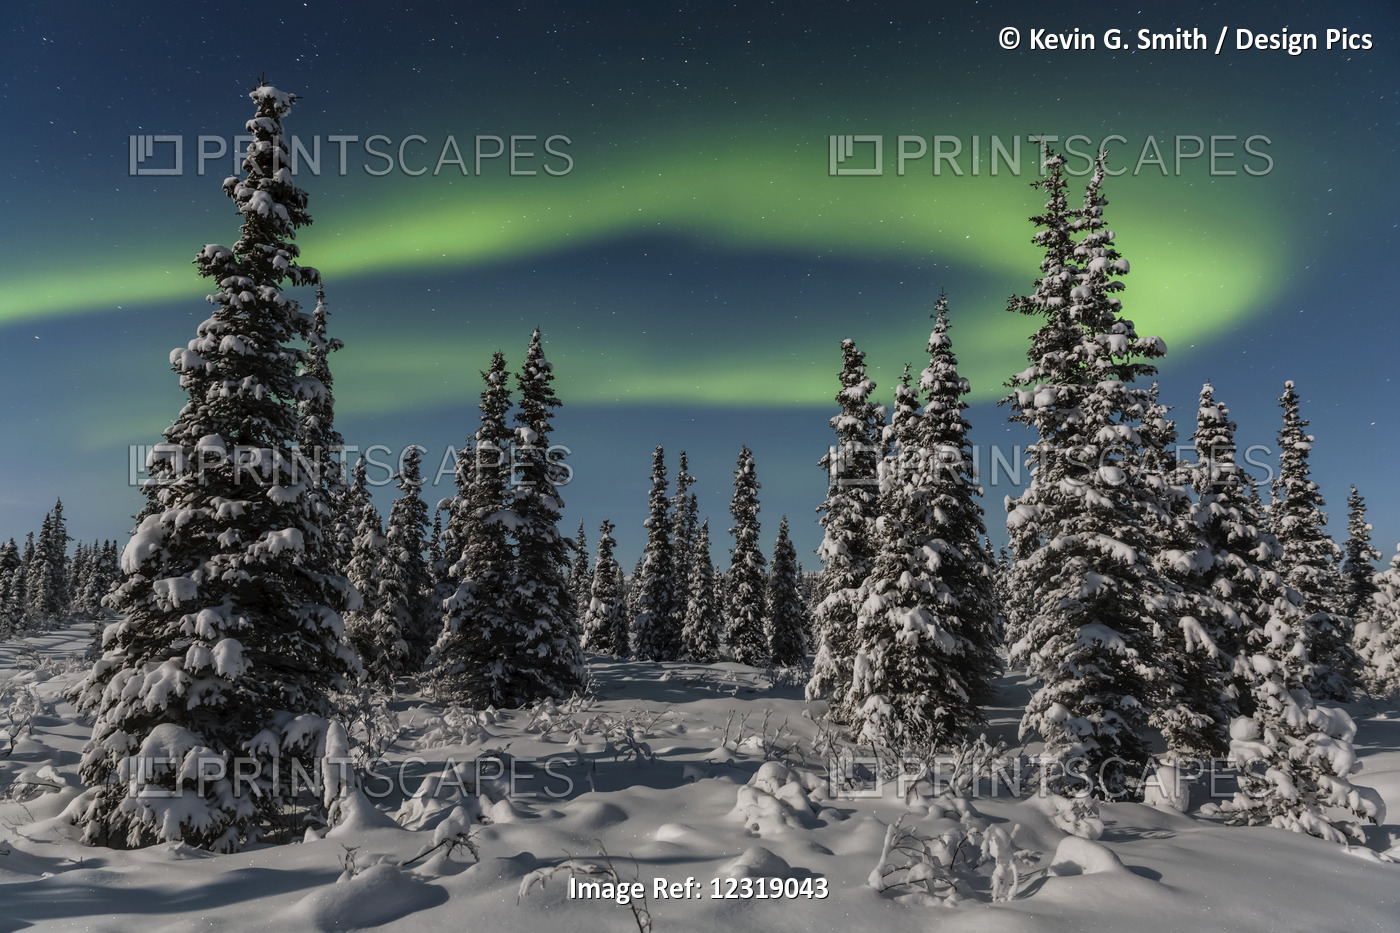 Green Aurora Borealis Dances Over The Tops Of Snow Covered Black Spruce Trees, ...